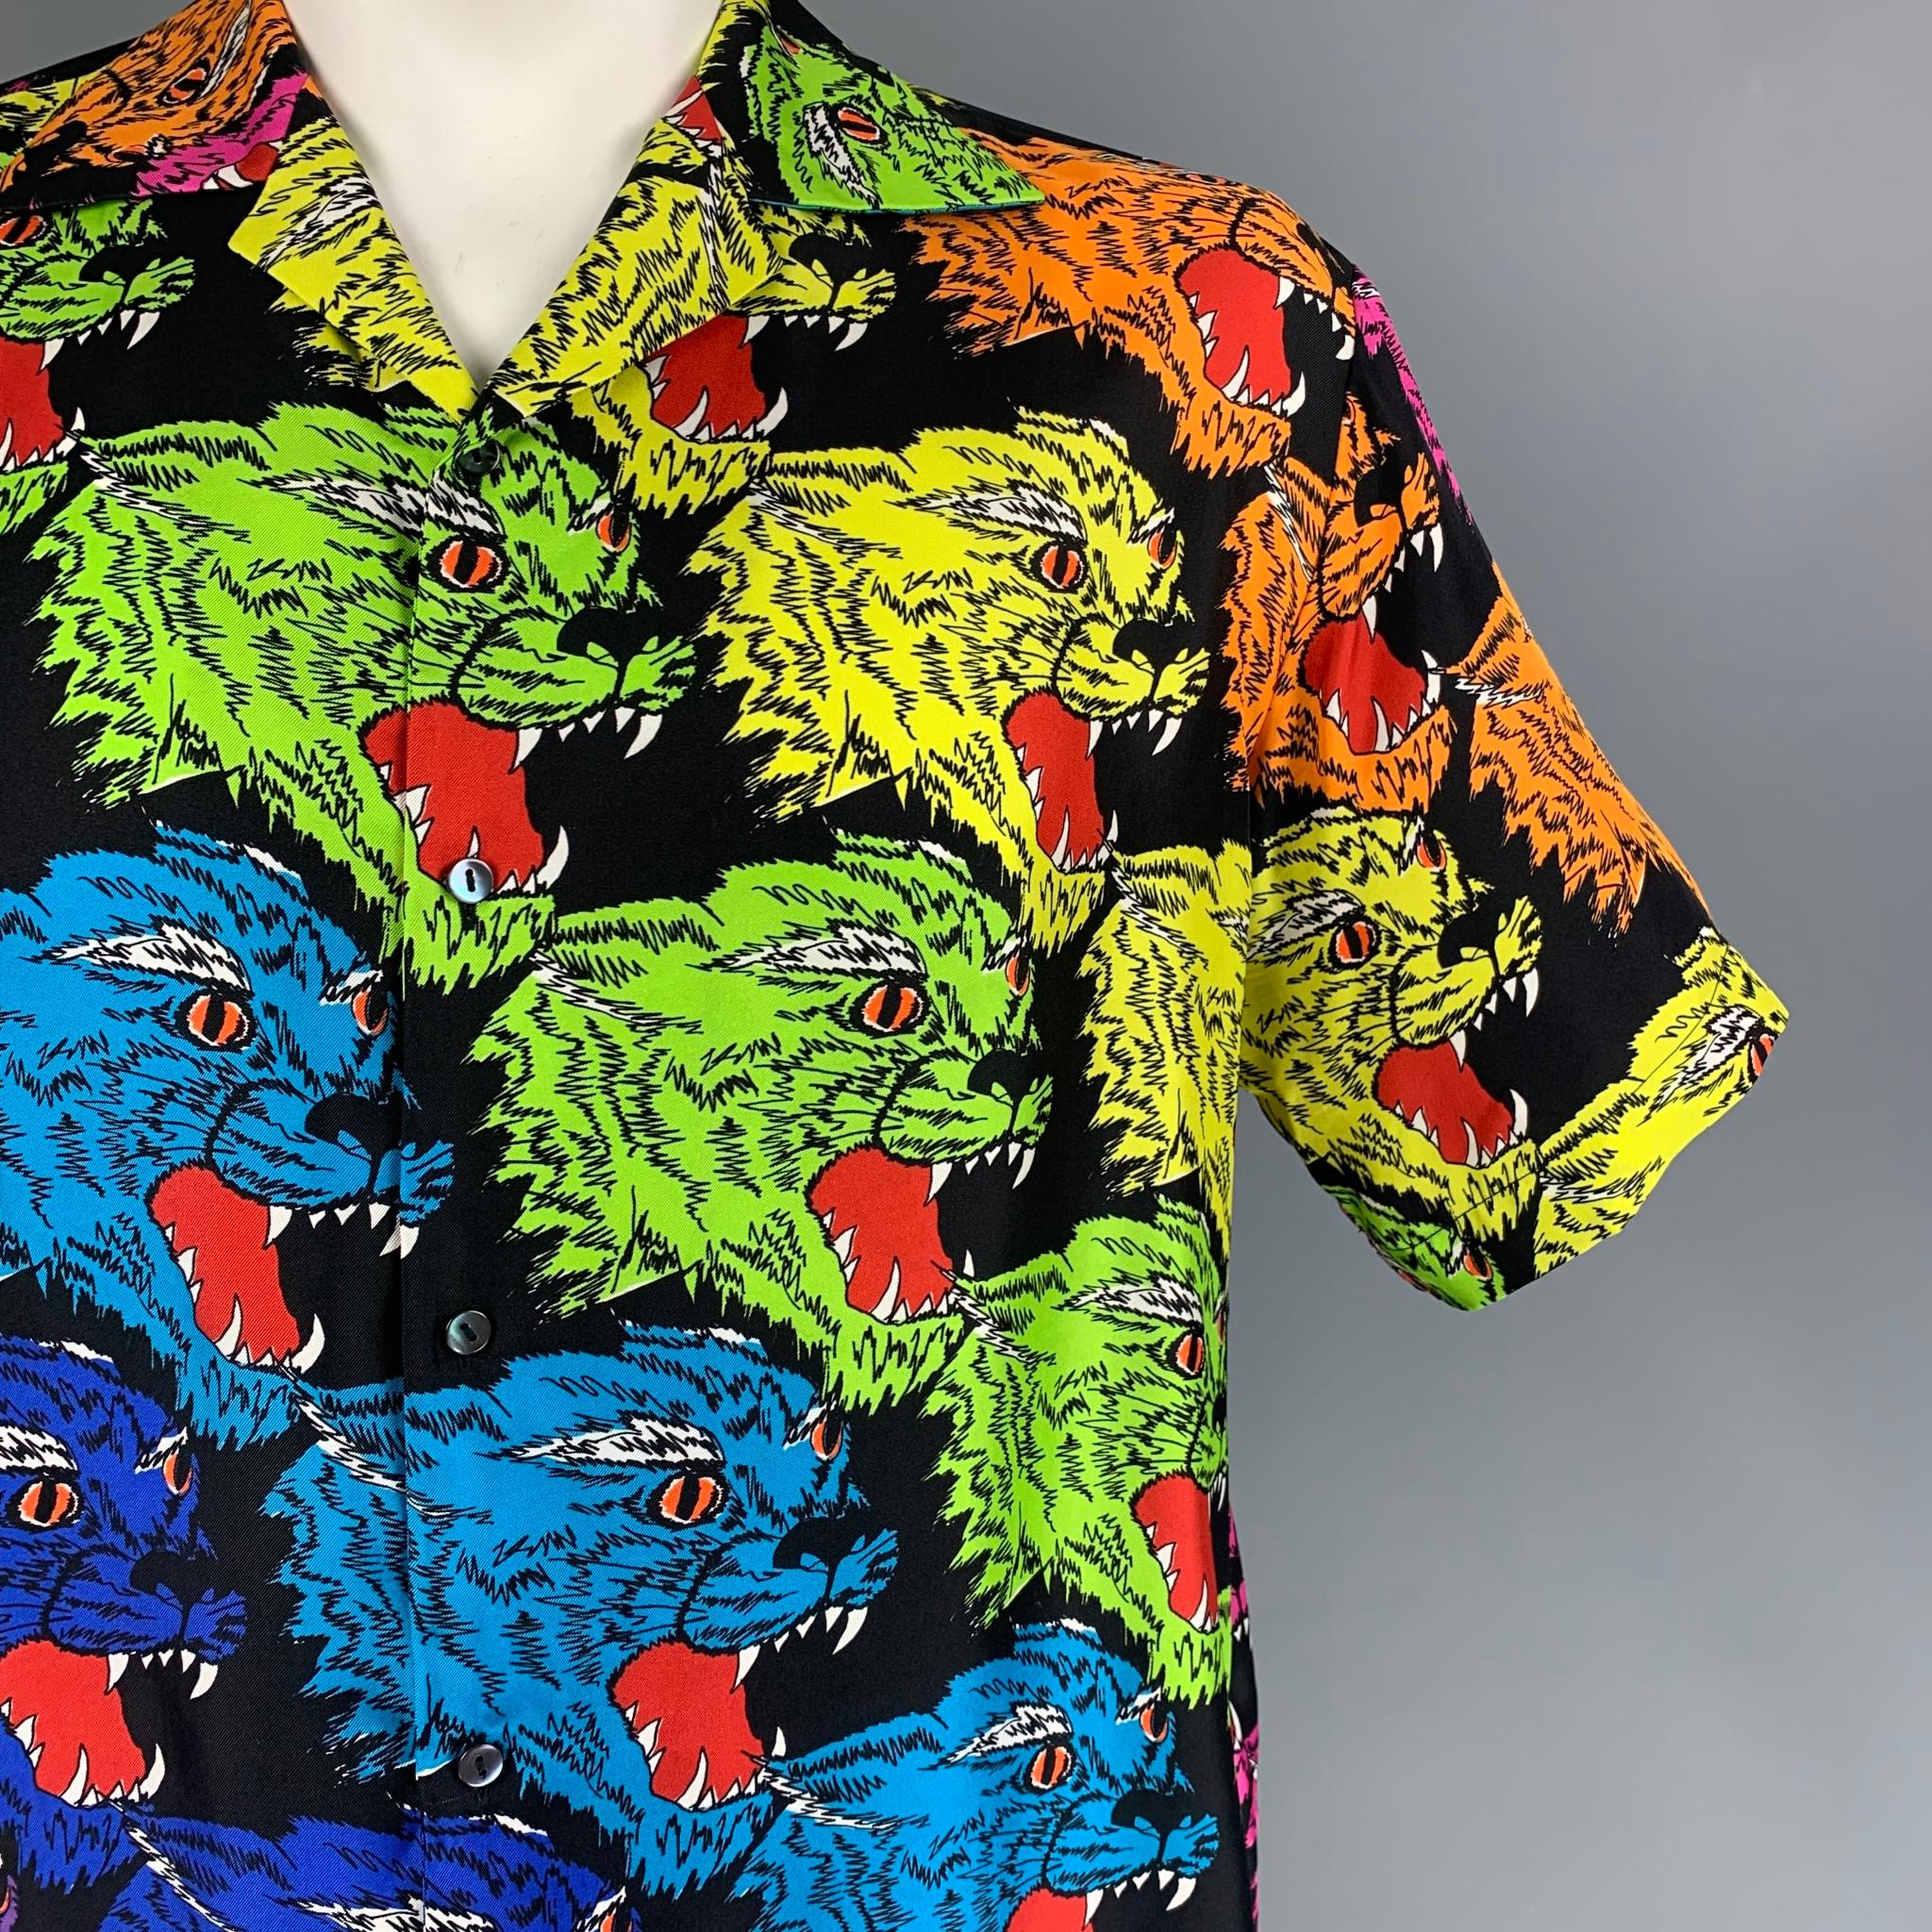 GUCCI short sleeve shirt comes in a multi-color 'angry tiger' print silk featuring a camp collar and a buttoned closure. Made in Italy.

Excellent Pre-Owned Condition.
Marked: 54

Measurements:

Shoulder: 21 in.
Chest: 48 in.
Sleeve: 11 in.
Length: